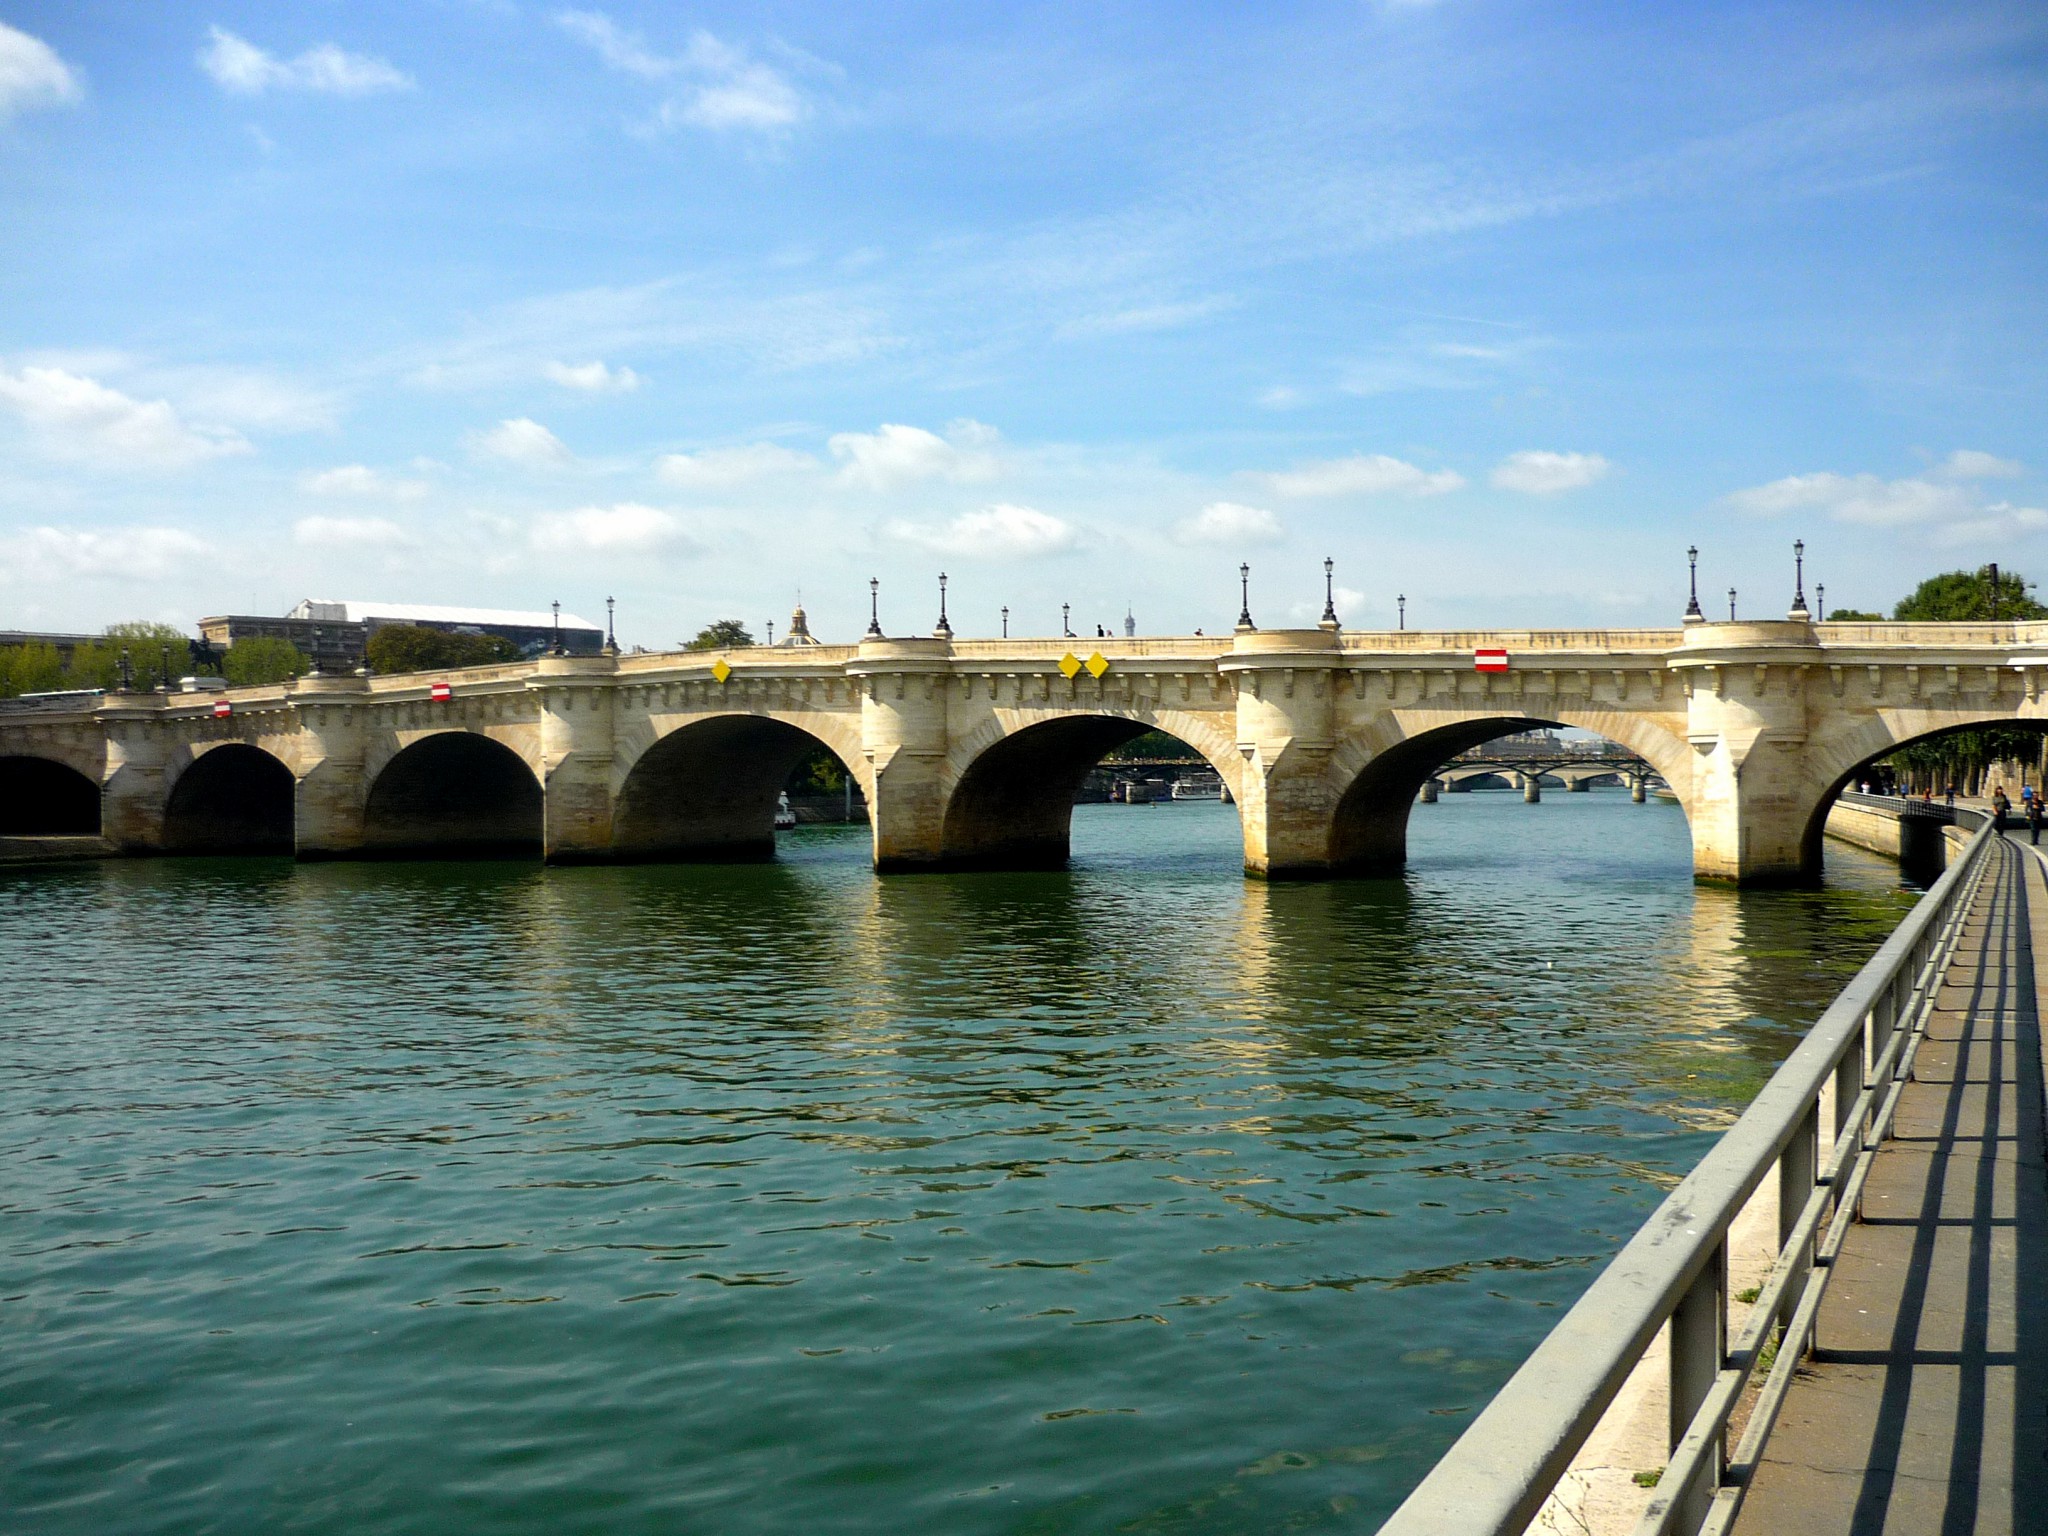 Pont Neuf - Get a Stunning View of the Seine and City From This